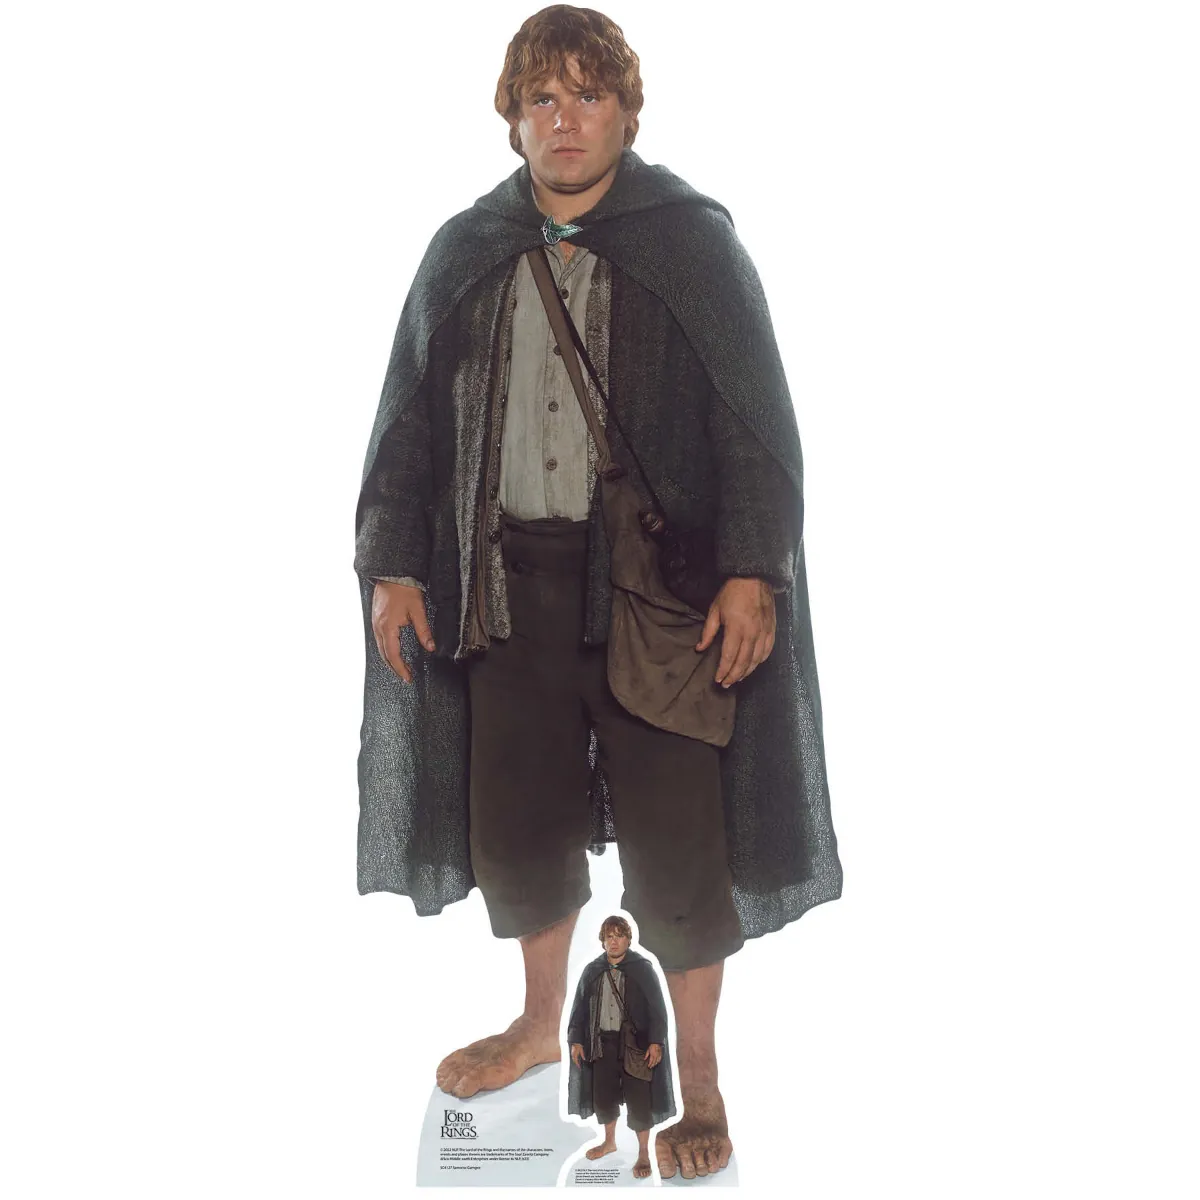 SC4127 Samwise Gamgee (The Lord of the Rings) Lifesize + Mini Cardboard Cutout Standee Front